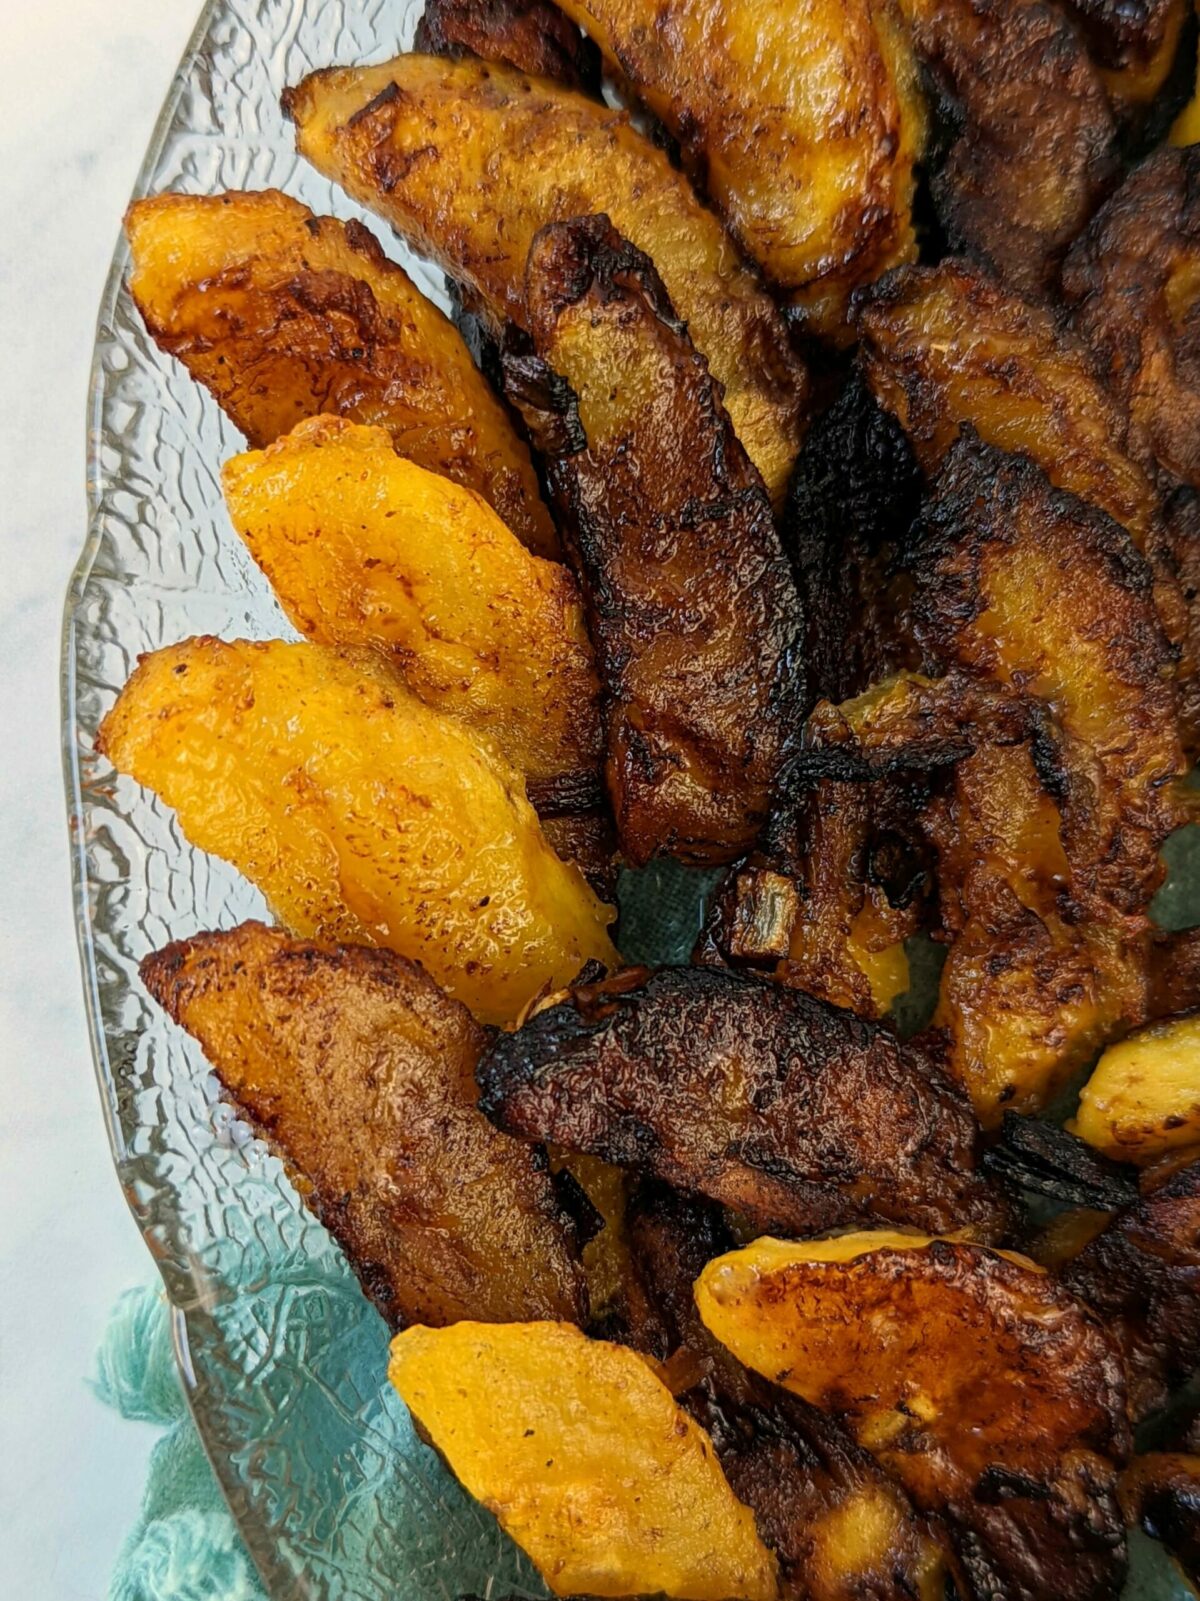 A bowl of fried plantain slices.